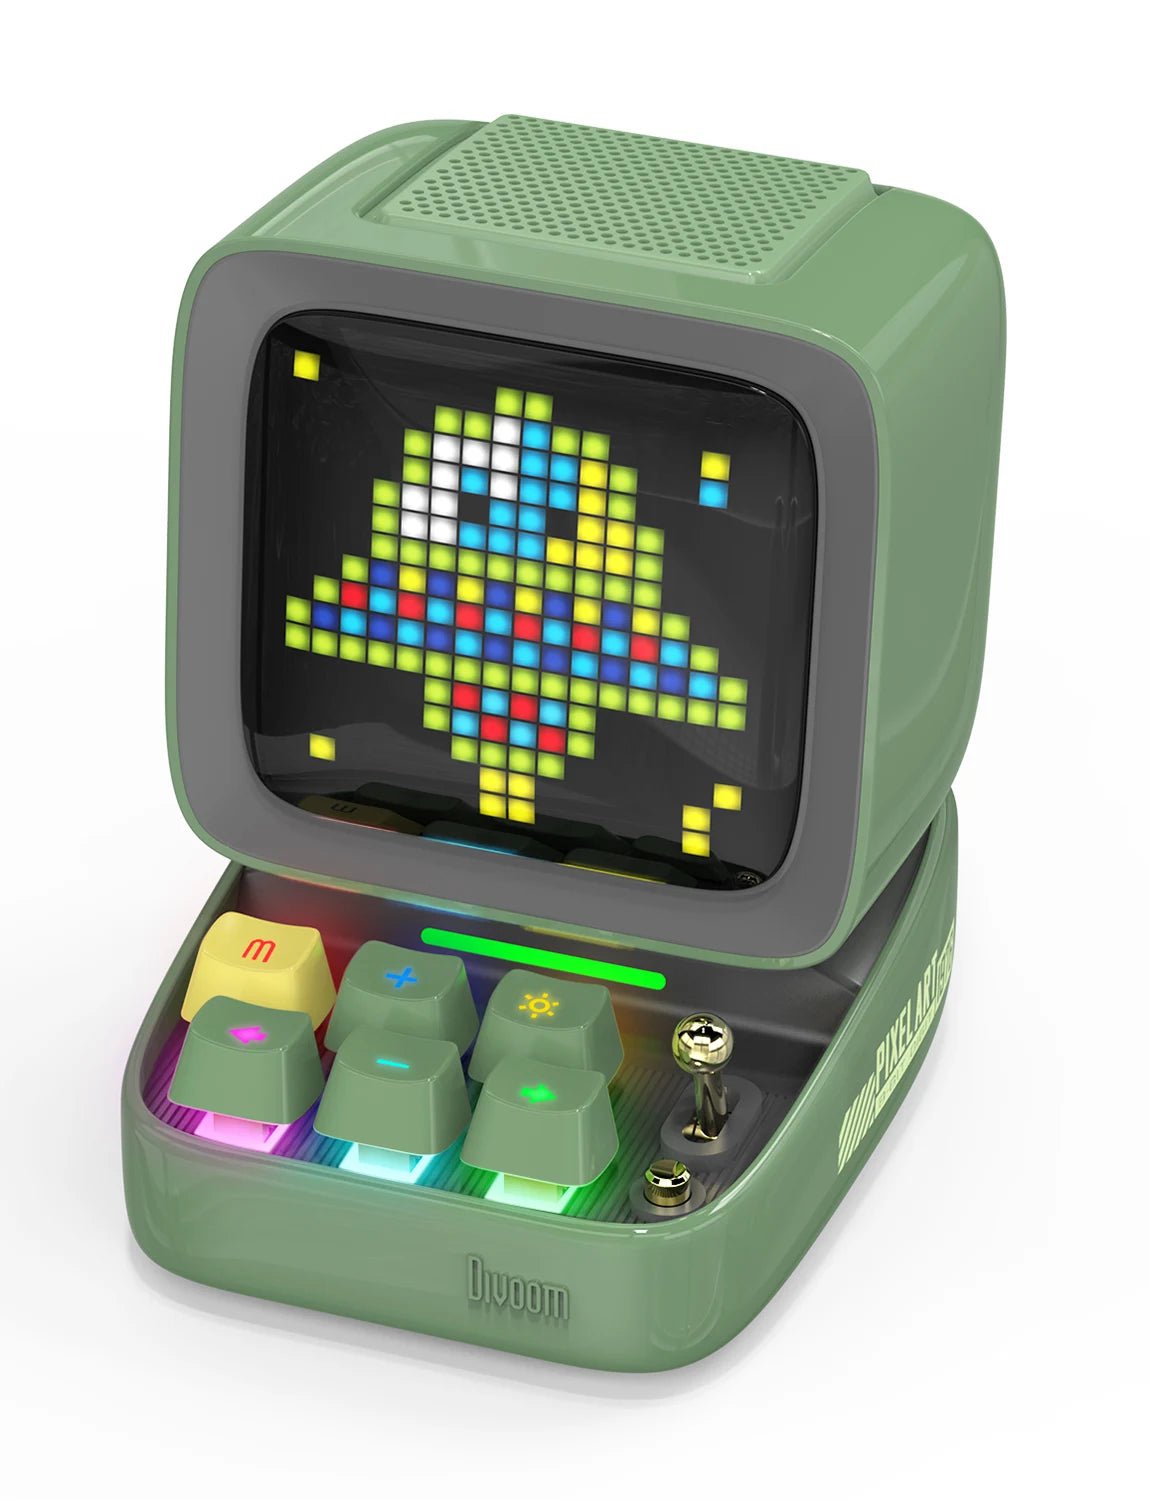 Divoom Ditoo Pixel Art Bluetooth Speaker - Wireless, 15W Output Power, Ideal for Gaming Room Setup with 16x16 LED App-Controlled Front Screen Green